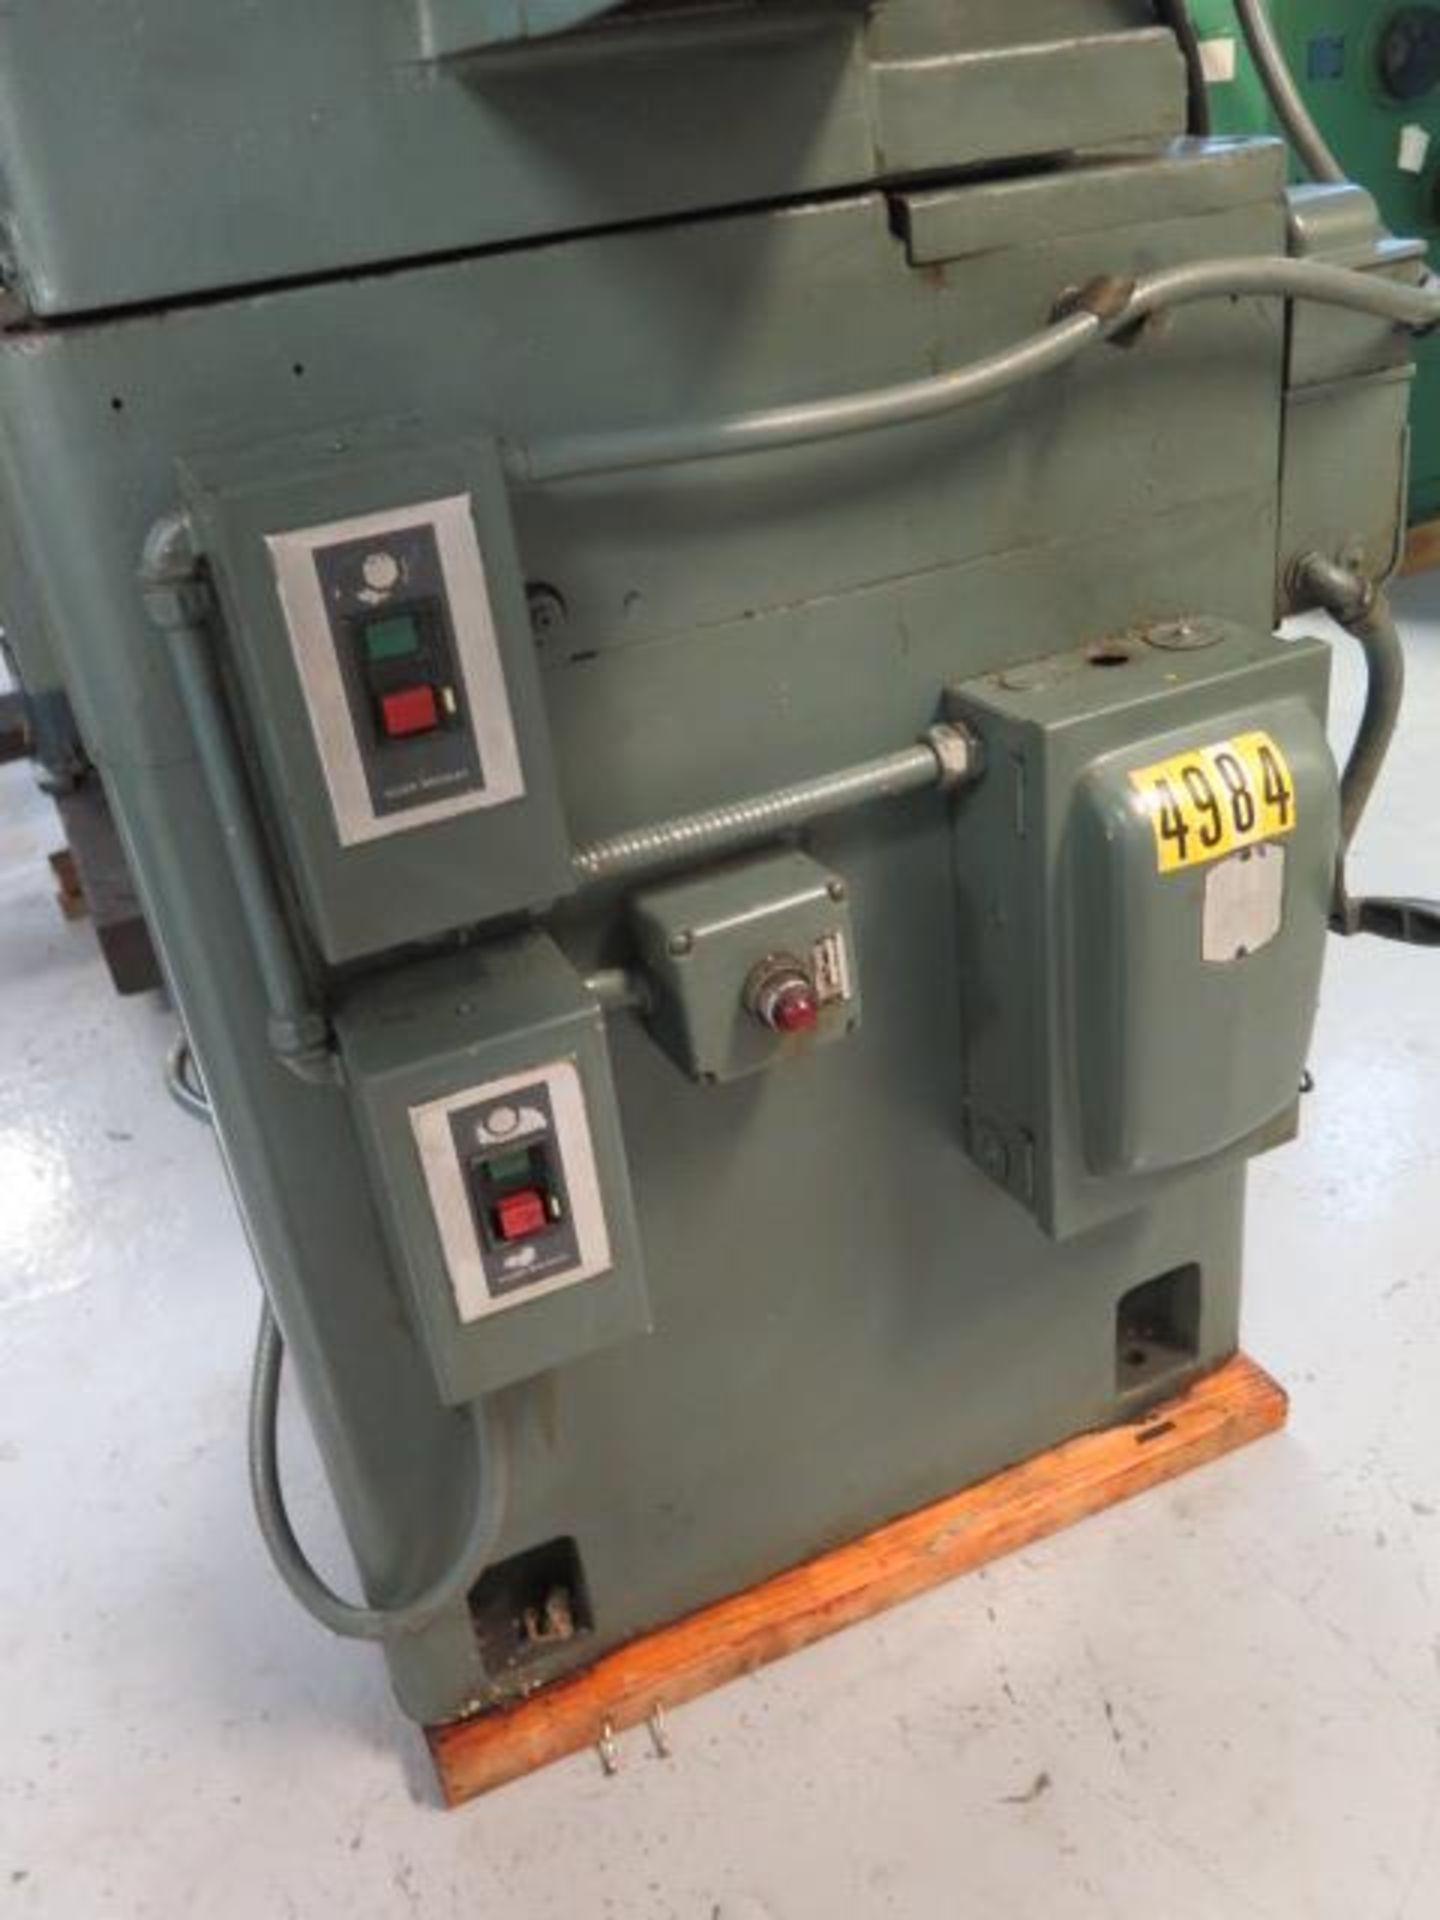 Reid 618HA 6” x 18” Hydraulic Surface Grinder s/n 14850 w/ 6” x 12” Mag Chuck, Coolant SOLD AS IS - Image 8 of 10